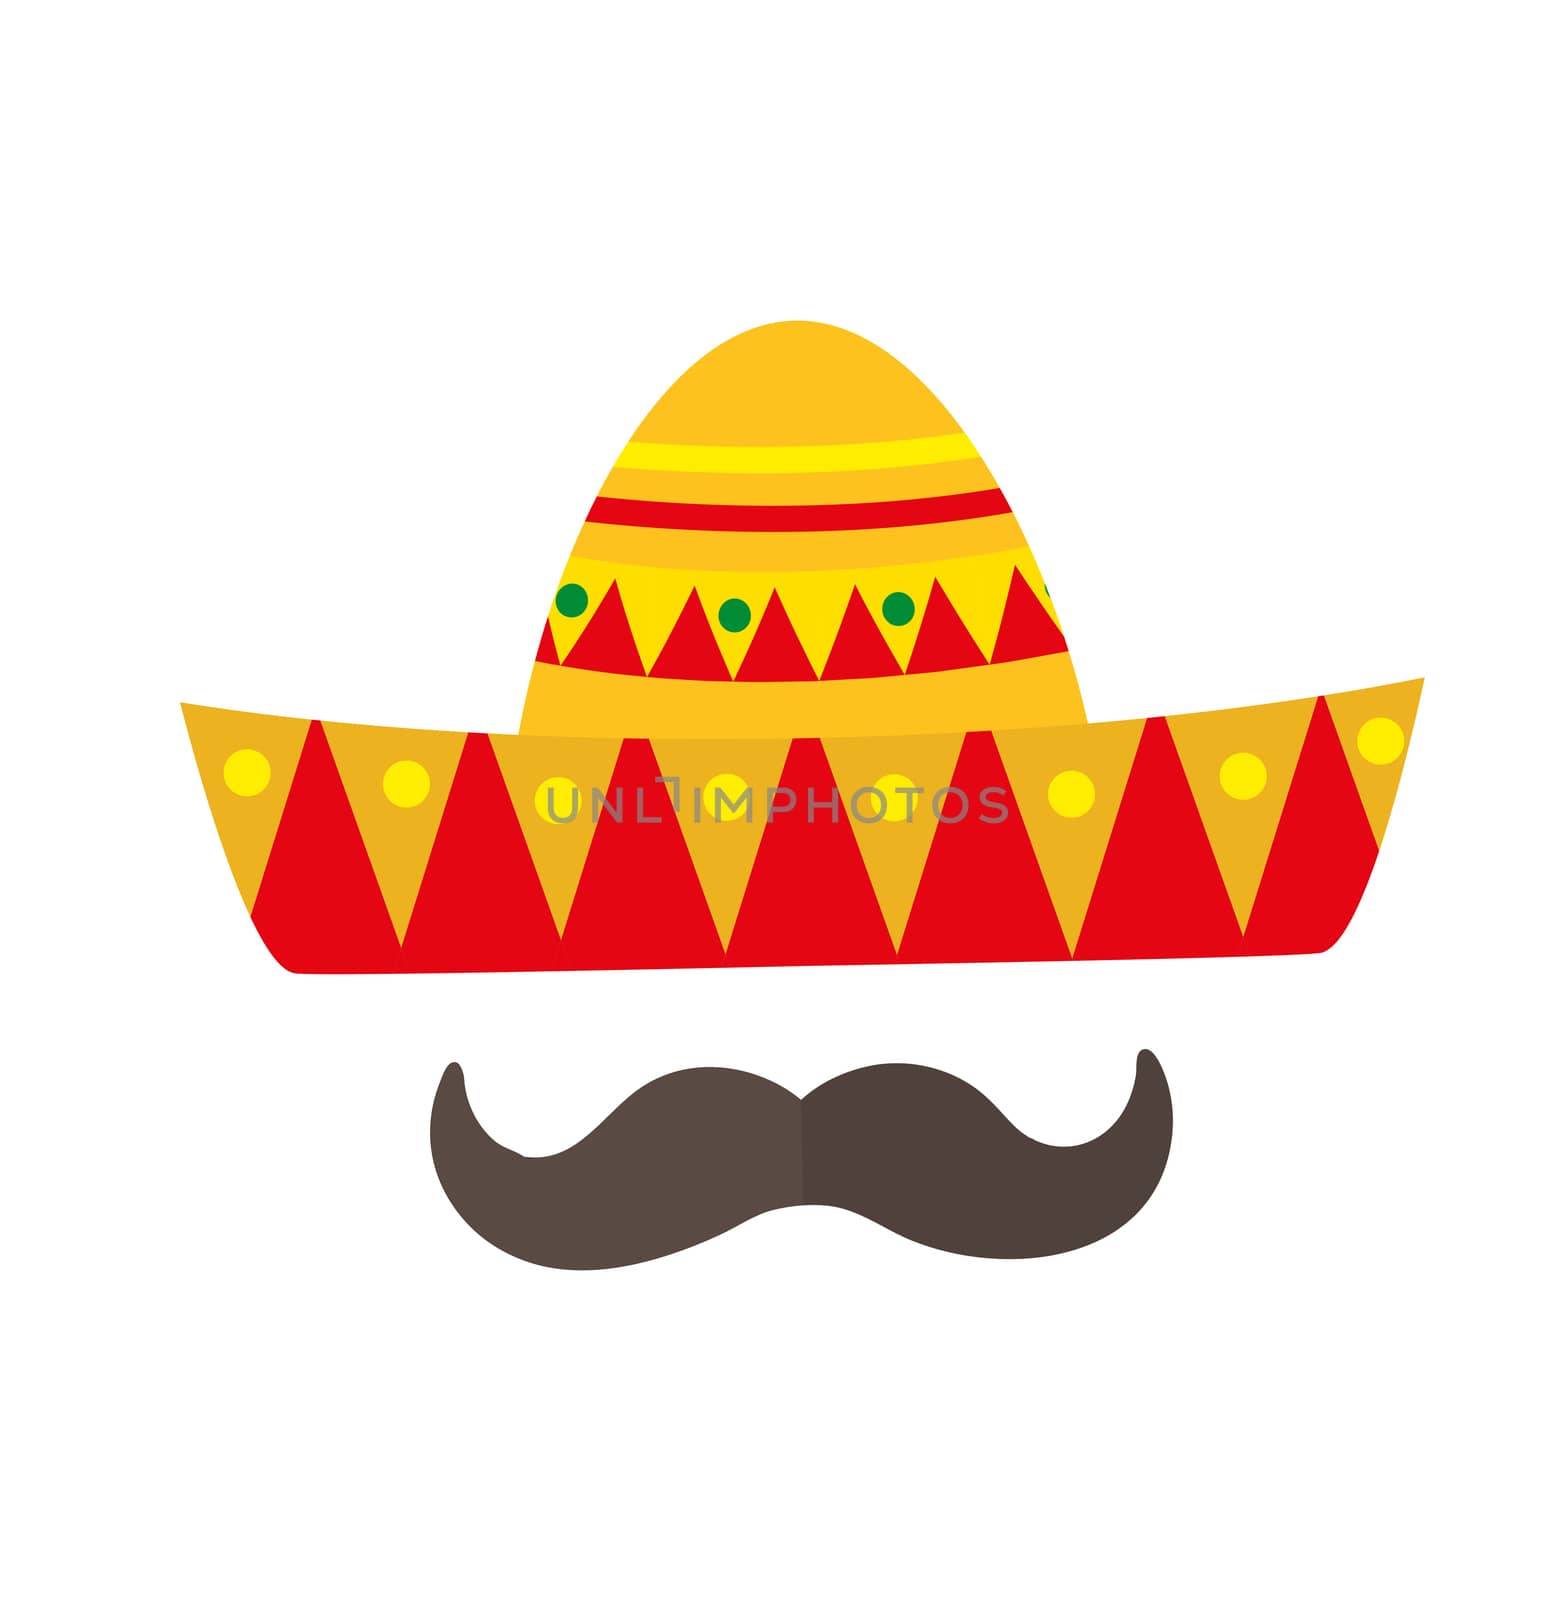 Sombrero icon, flat style. Mexican traditional clothing. Isolated on white background. illustration, clip-art. by lucia_fox